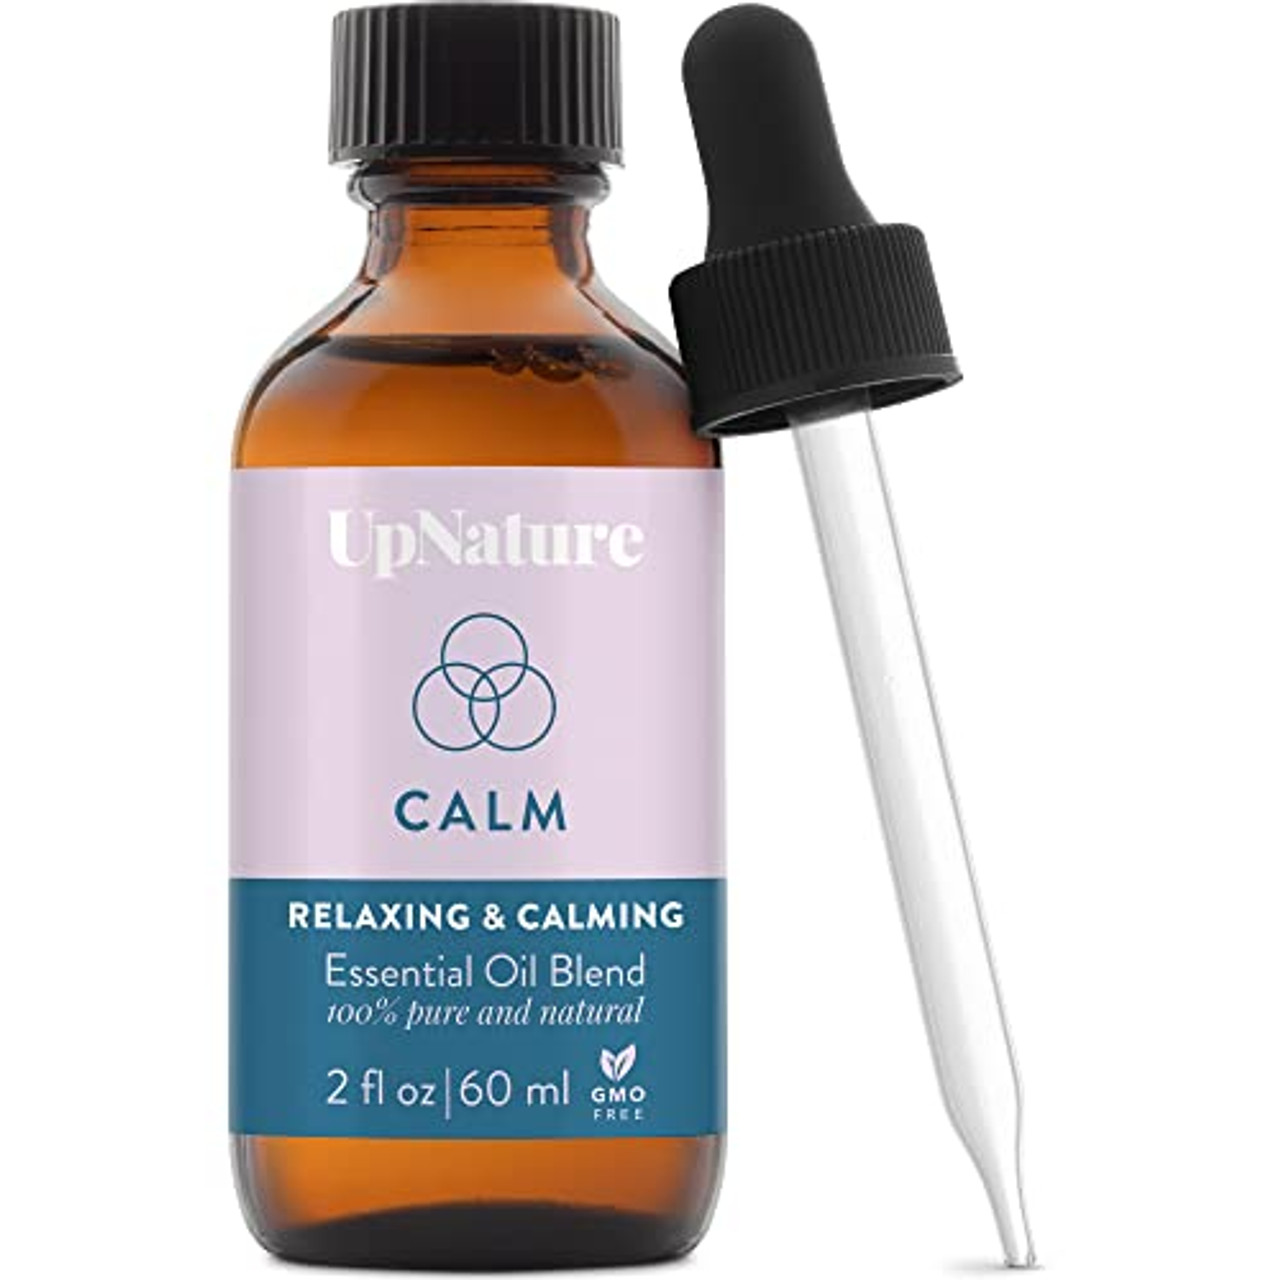 Calm Essential Oil Blend 2 oz - Stress Relief Relaxation Gifts for Women -  Calm Sleep, Destress Aromatherapy Oils with Peppermint Oil, Ginger Oil –  Undiluted, Therapeutic Grade